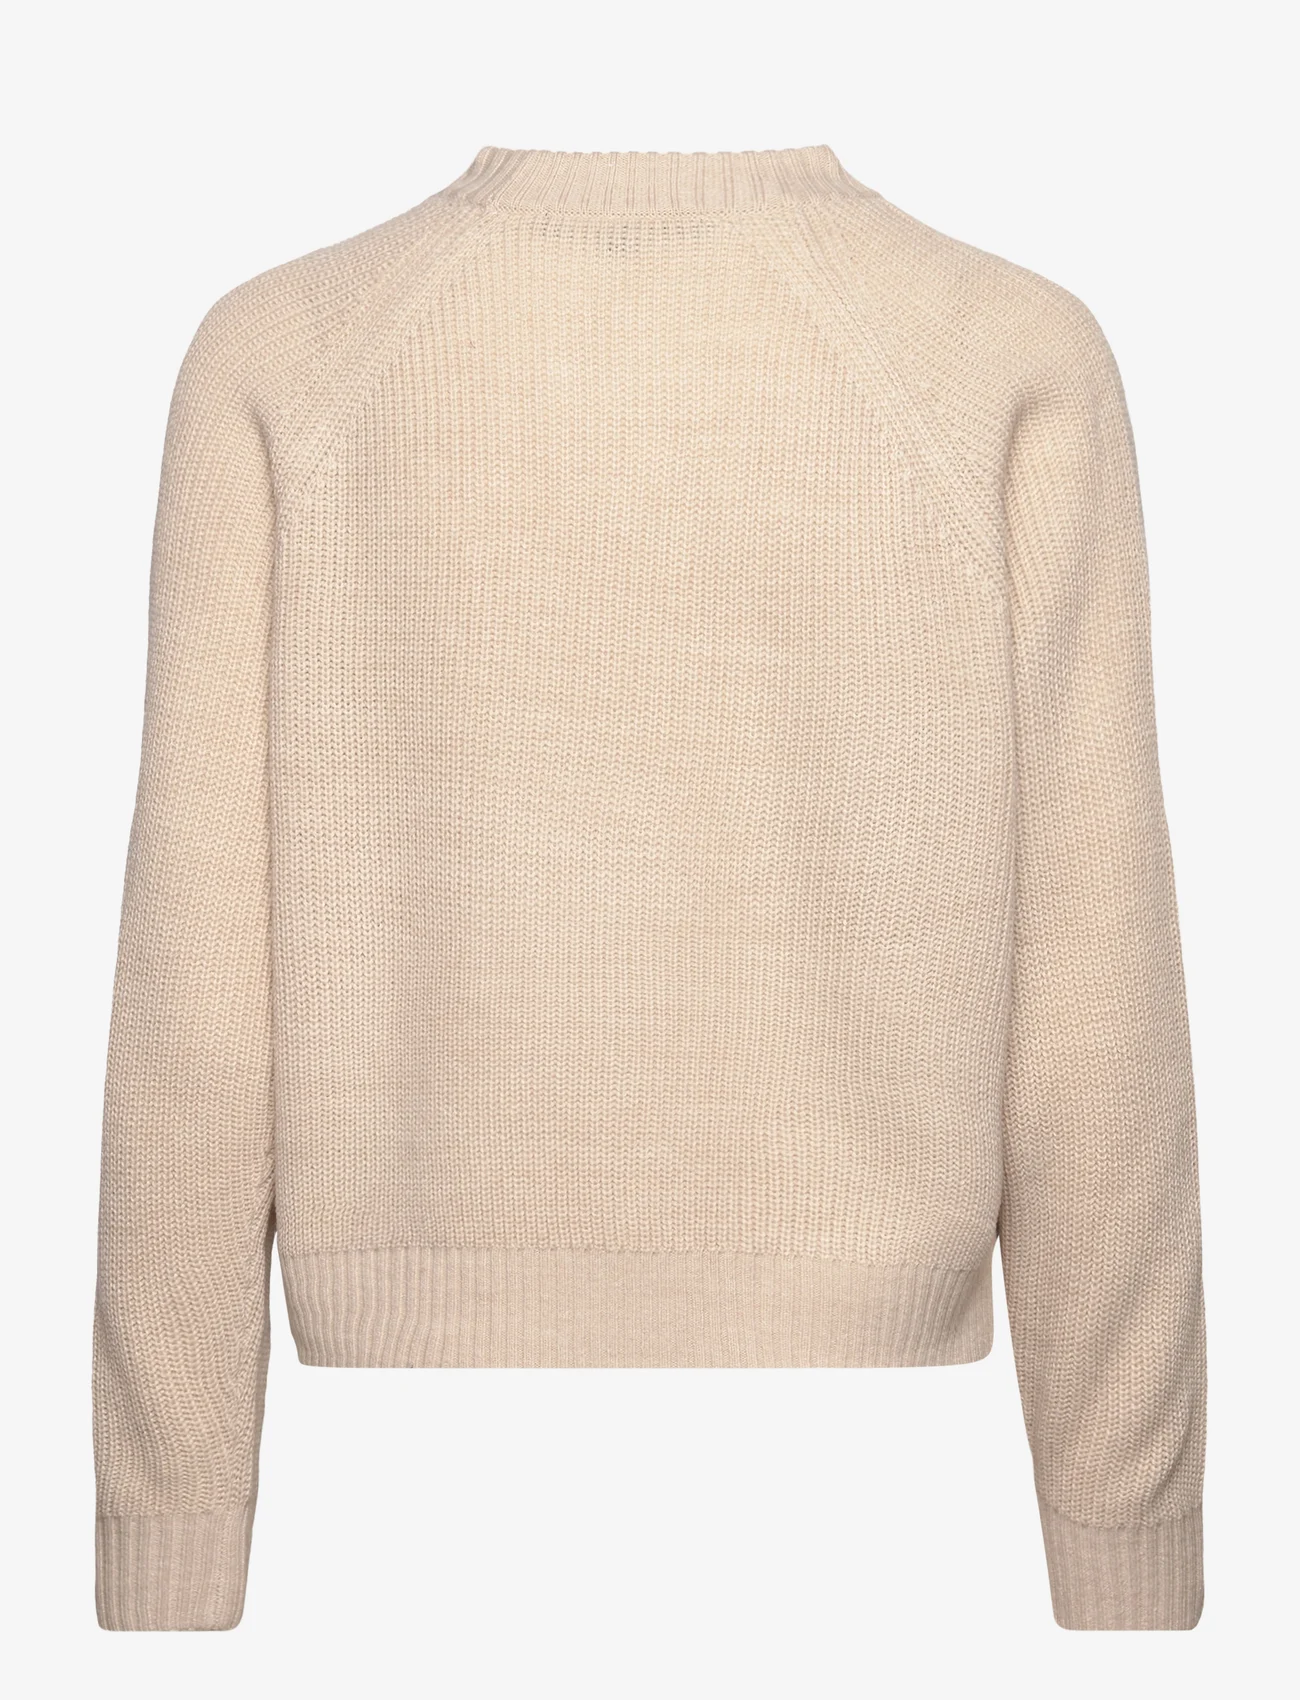 French Connection - JOLEE PEARL LONG SLEEVE CREW - jumpers - oatmeal mel - 1